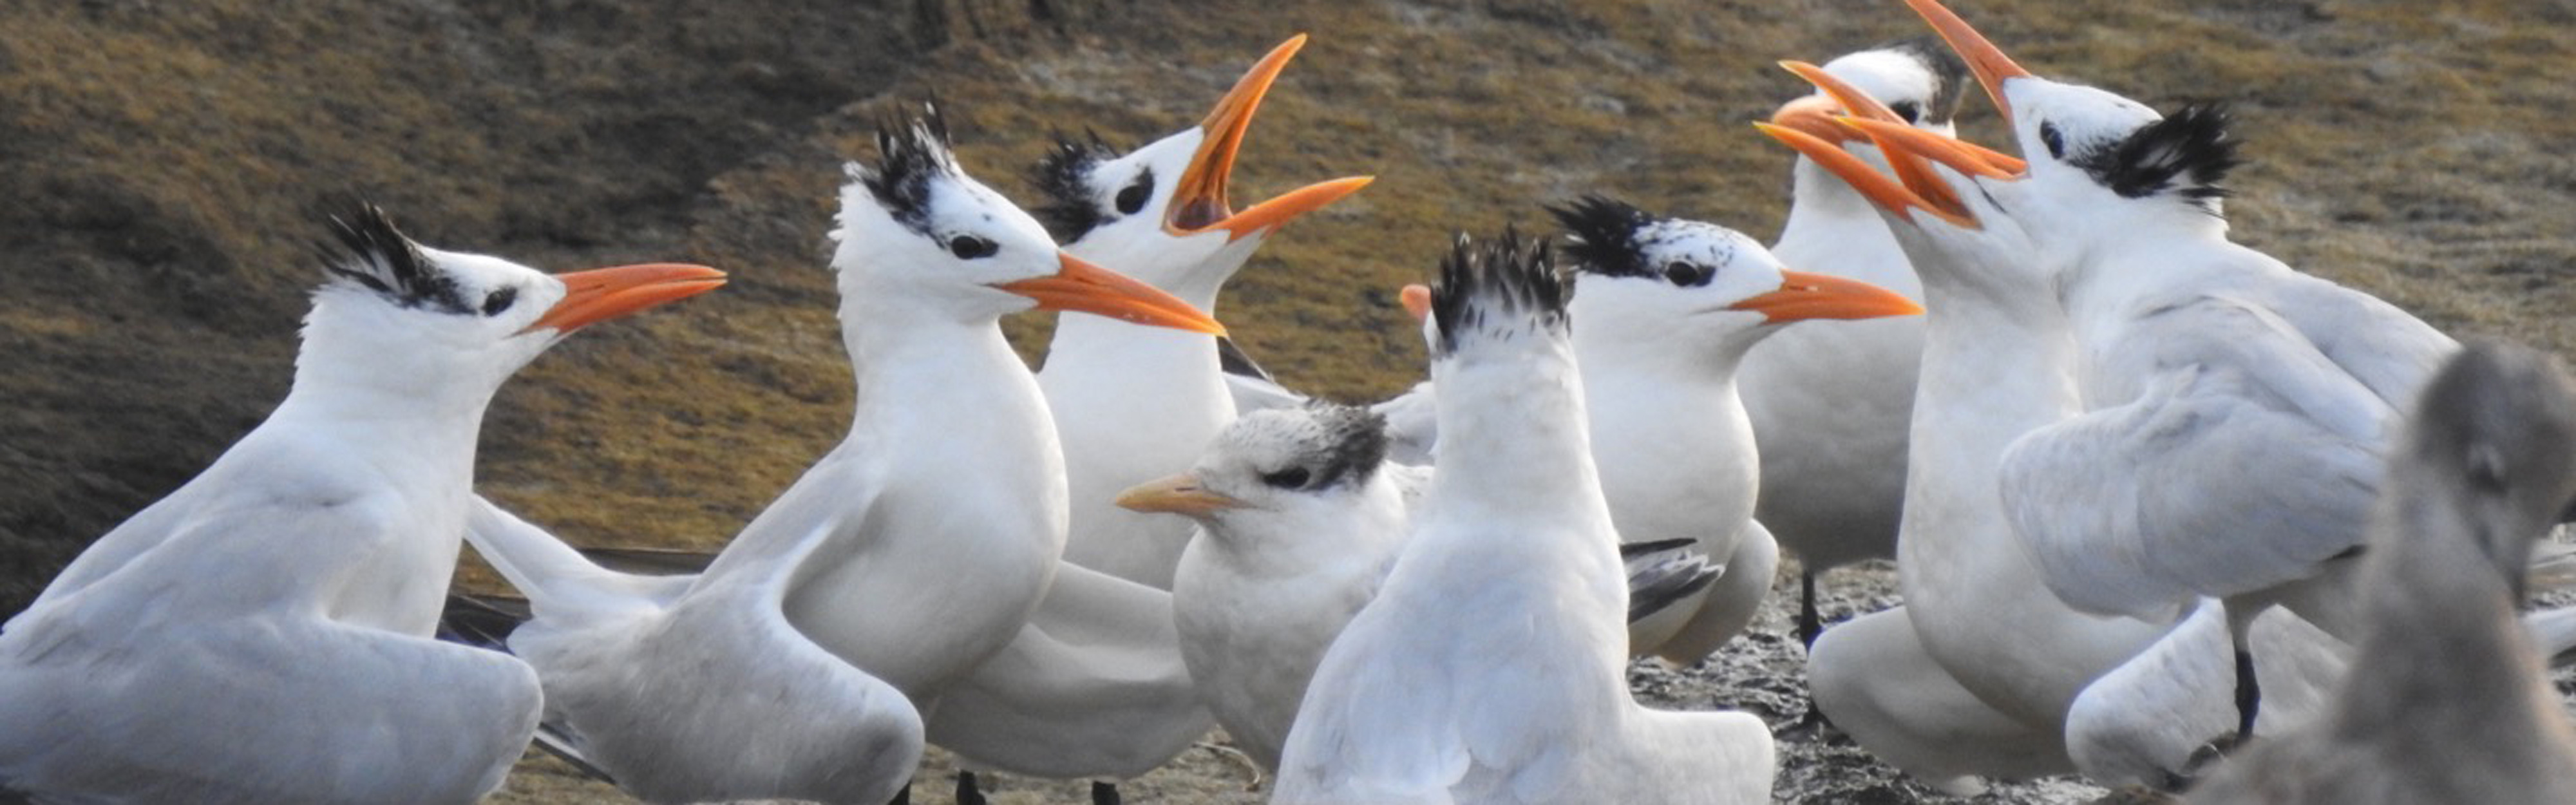 A group of Royal Terns sit together on South Island